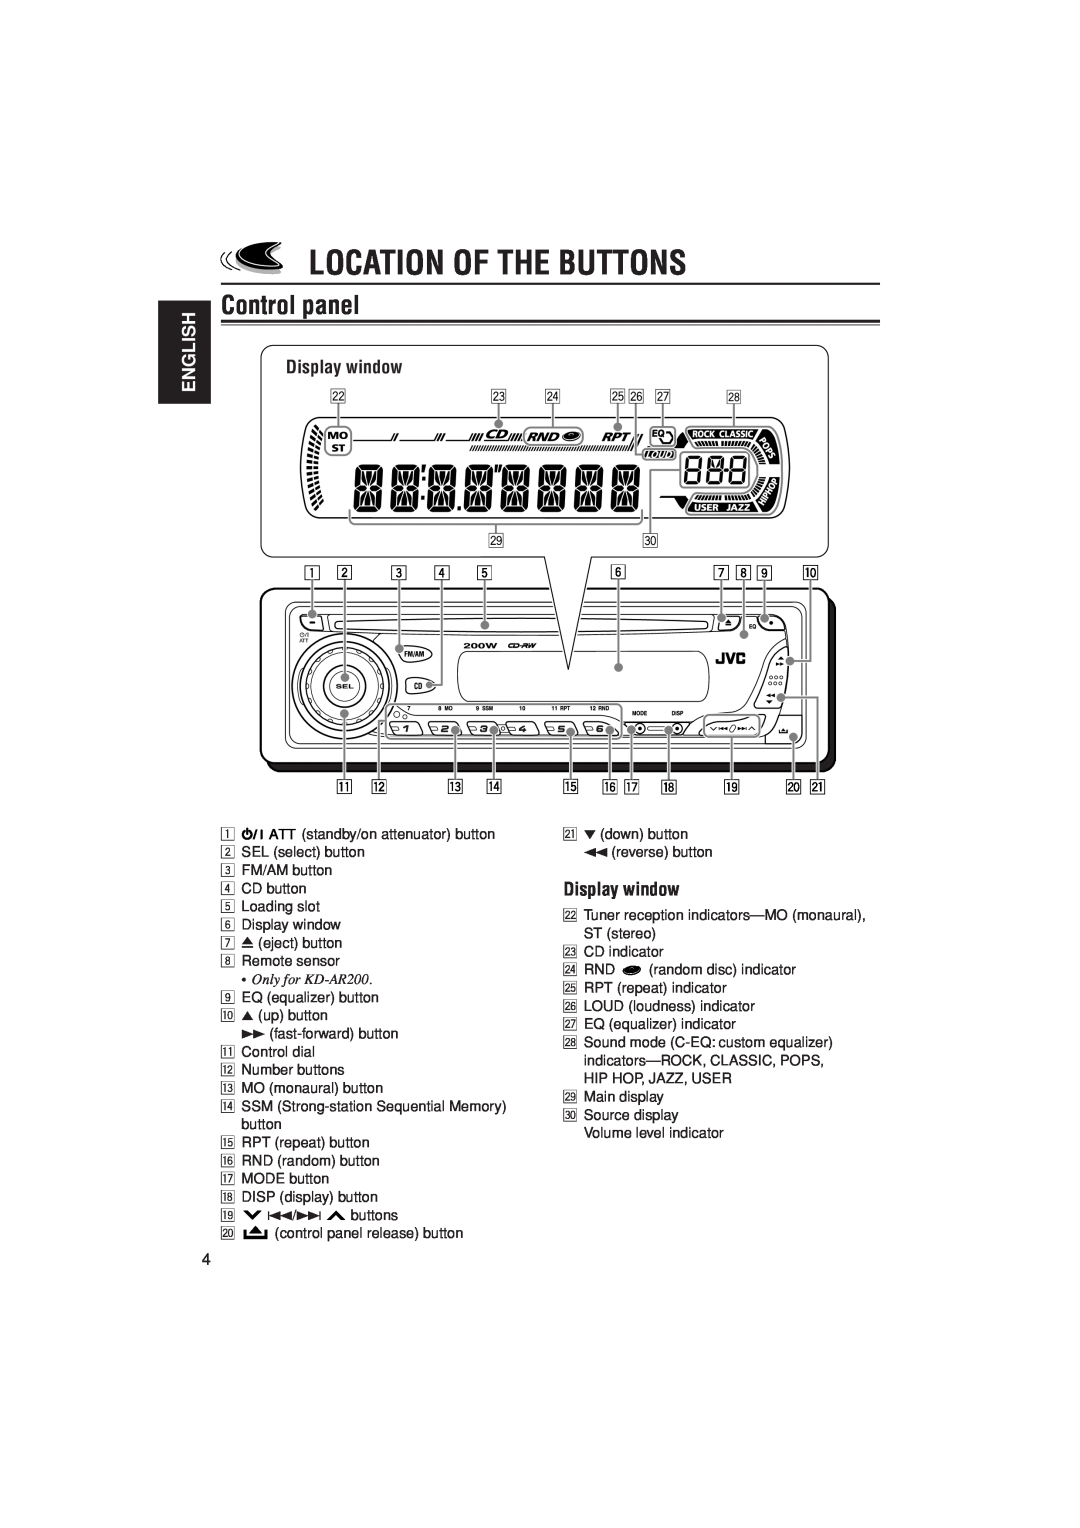 JVC KD-AR200, KD-G200 manual Location Of The Buttons, Control panel, Display window, English 